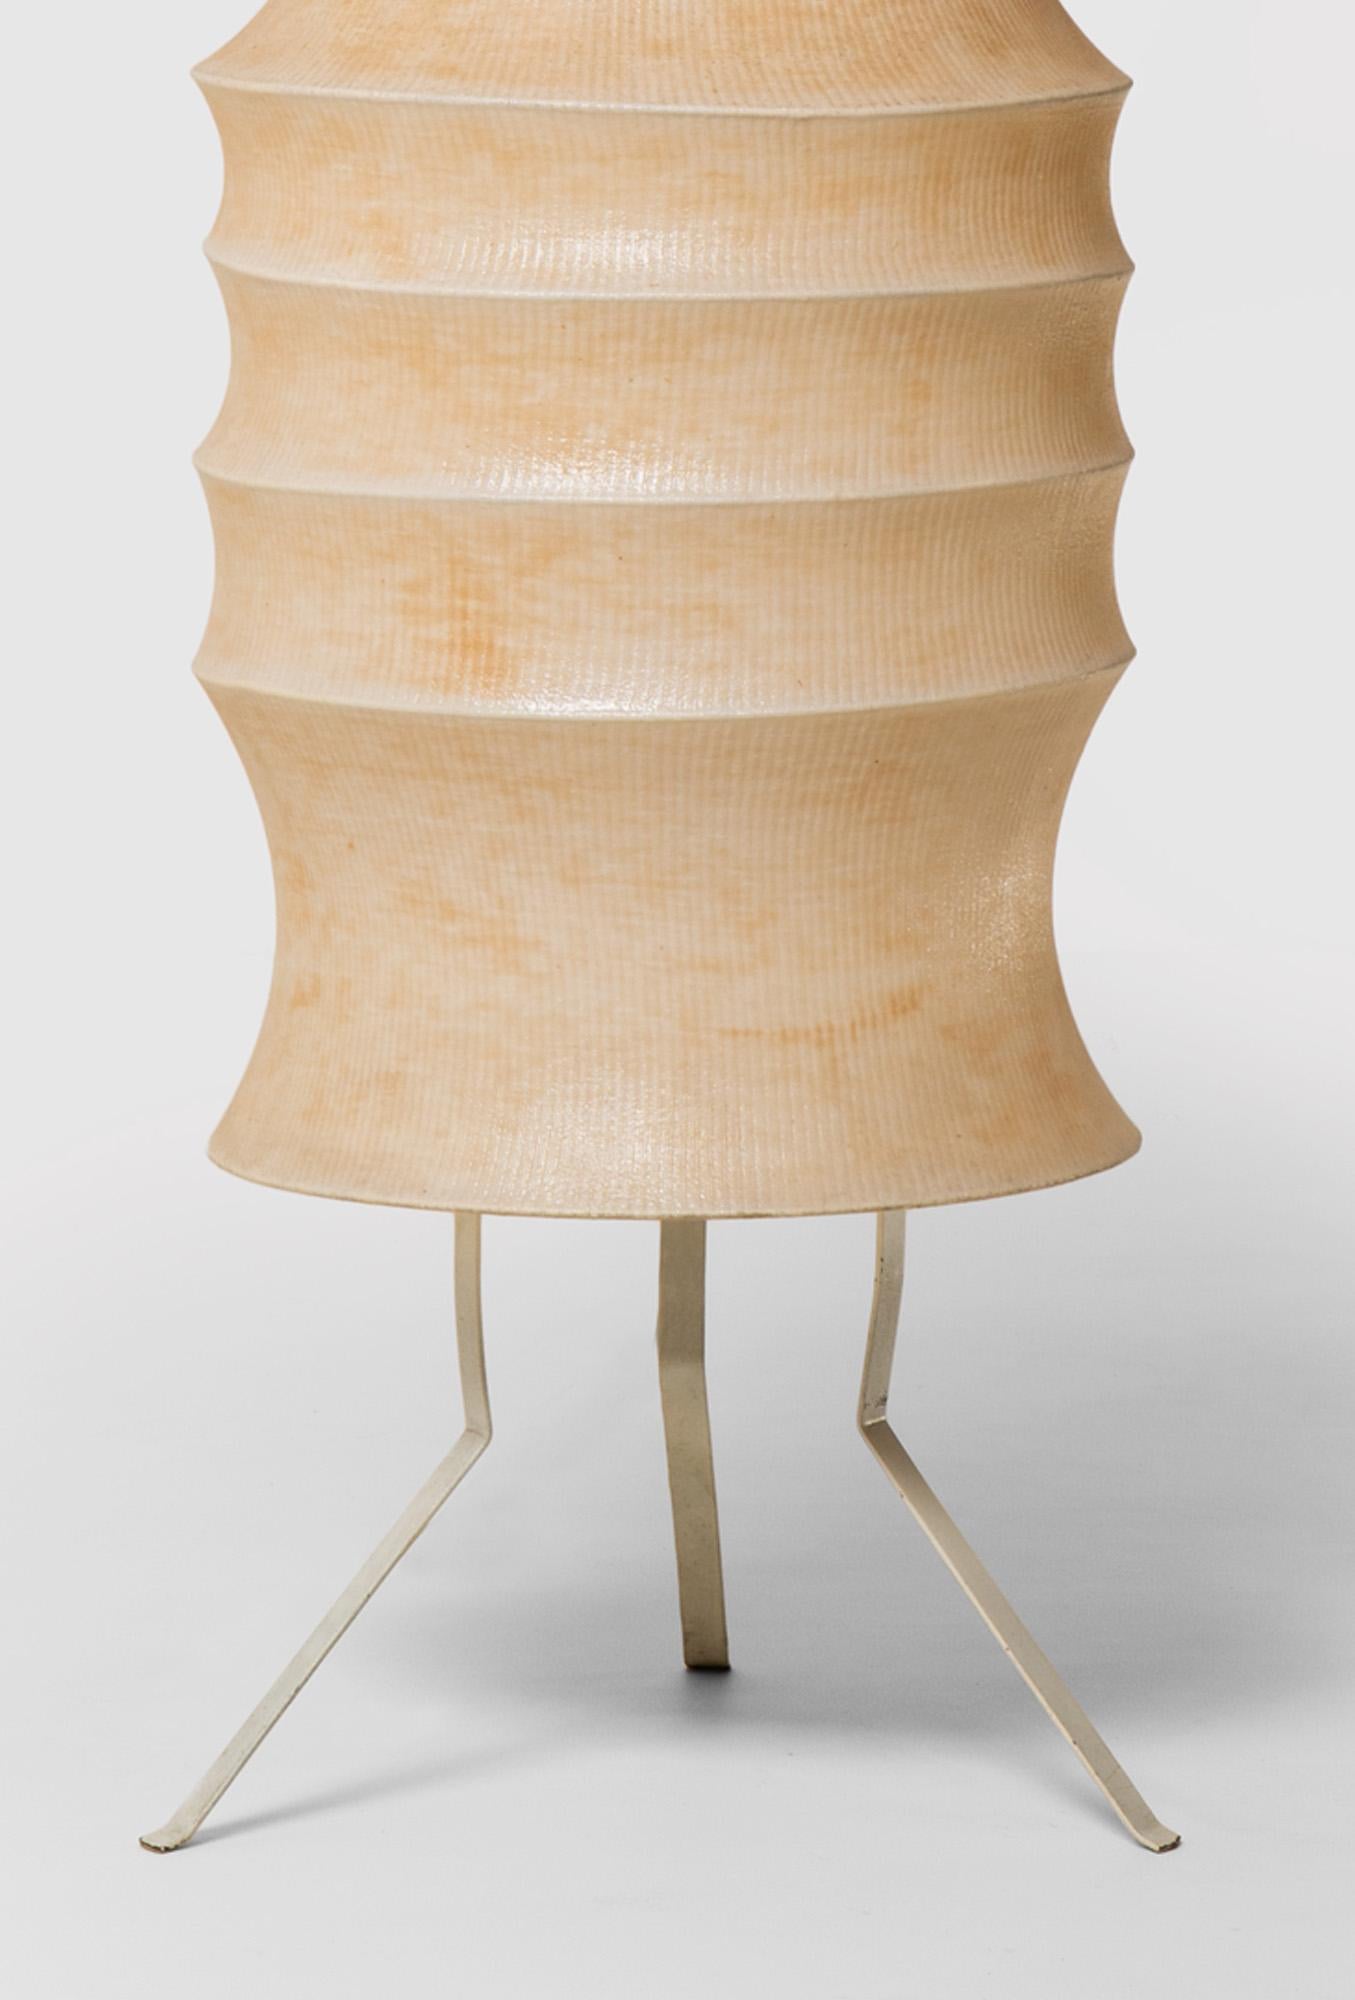 Other Cocoon Floor Lamp, Italy, 1970s, in the Style of Bruno Munari